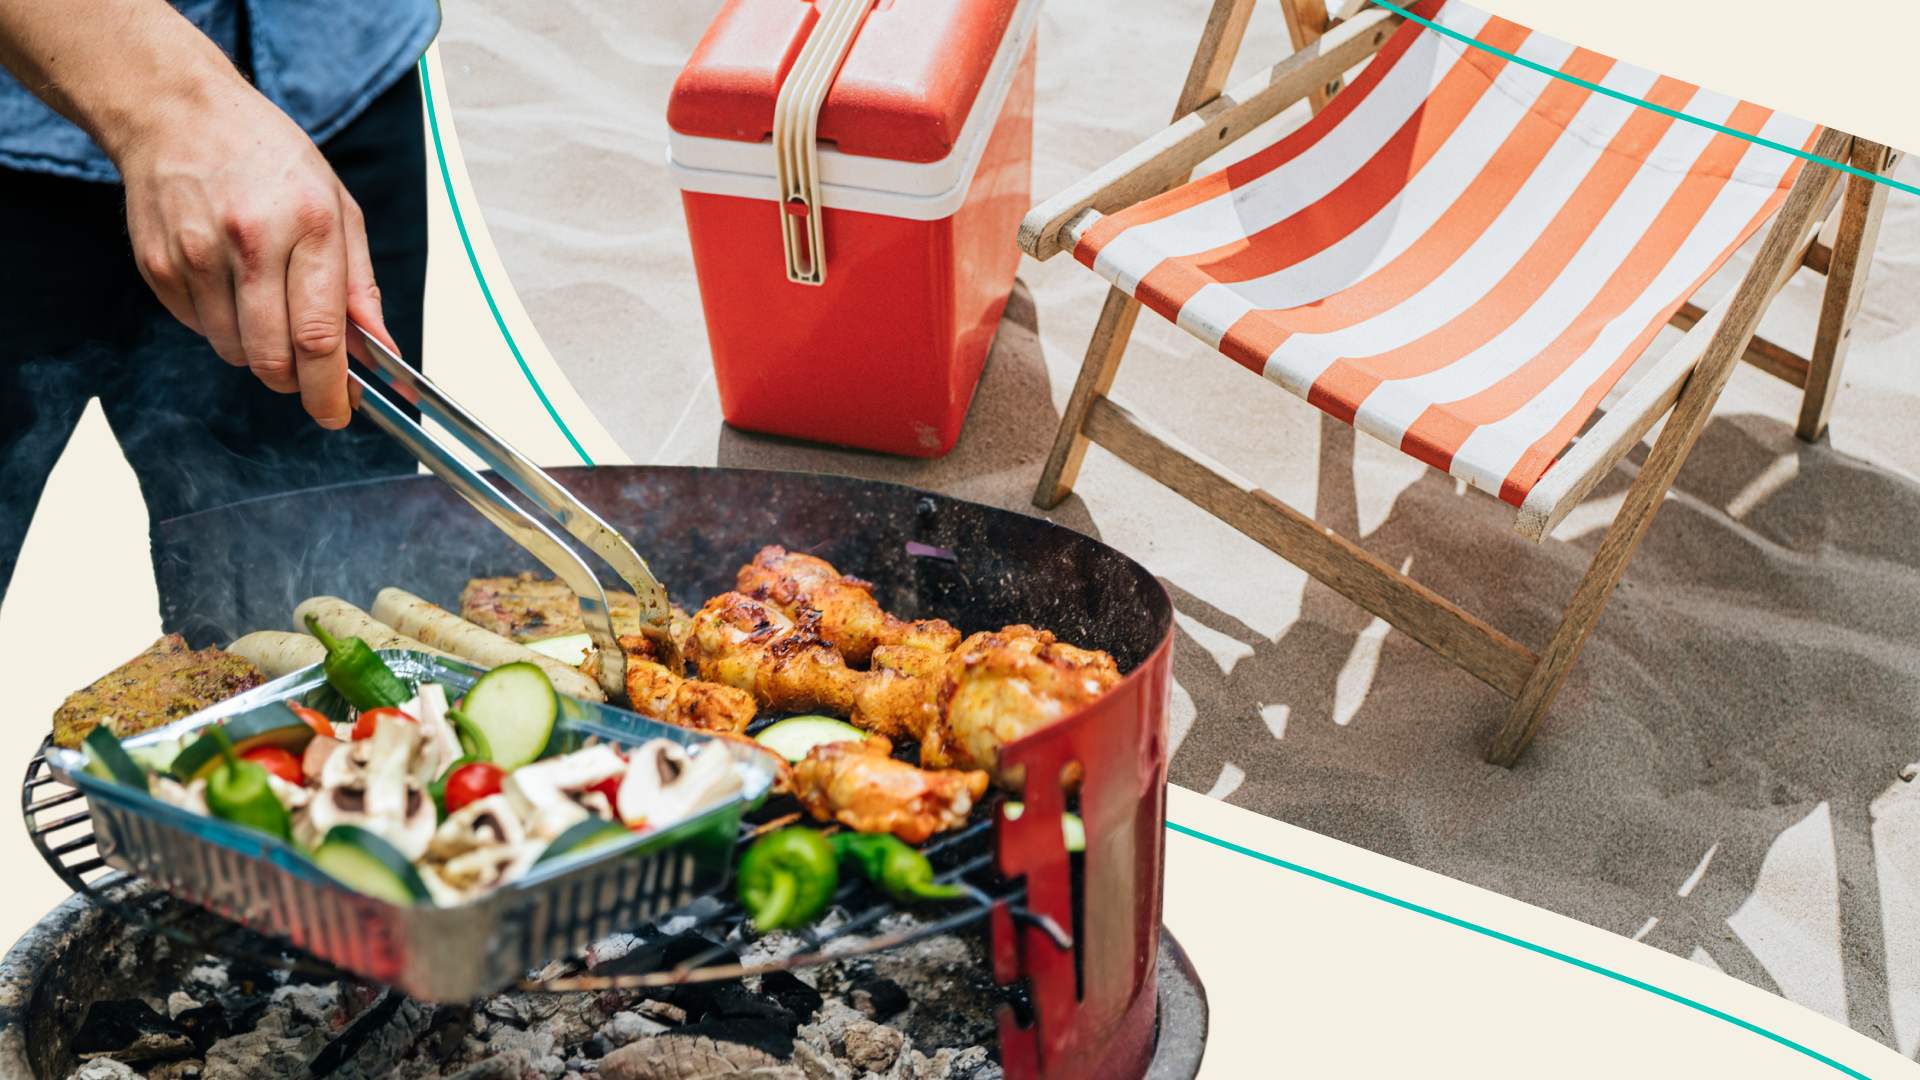 person grilling vegetables and meat next to chair and cooler set up on beach